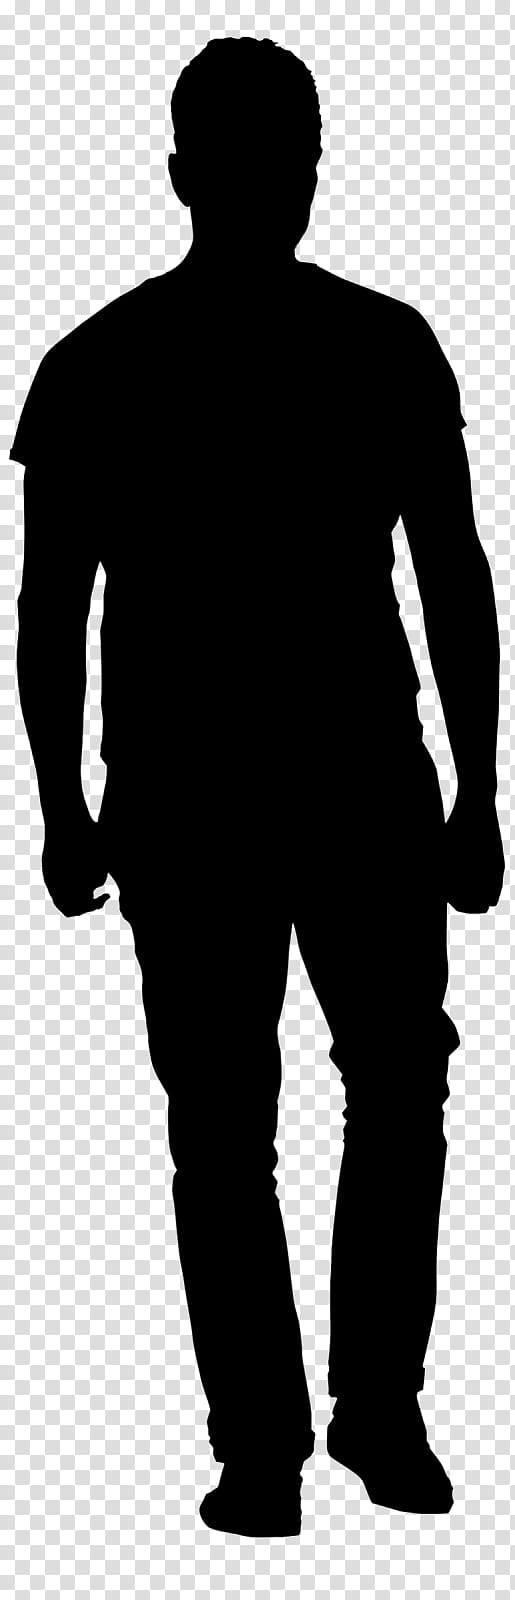 Person, Silhouette, Man, Human, Black, Drawing, Standing, Male transparent background PNG clipart